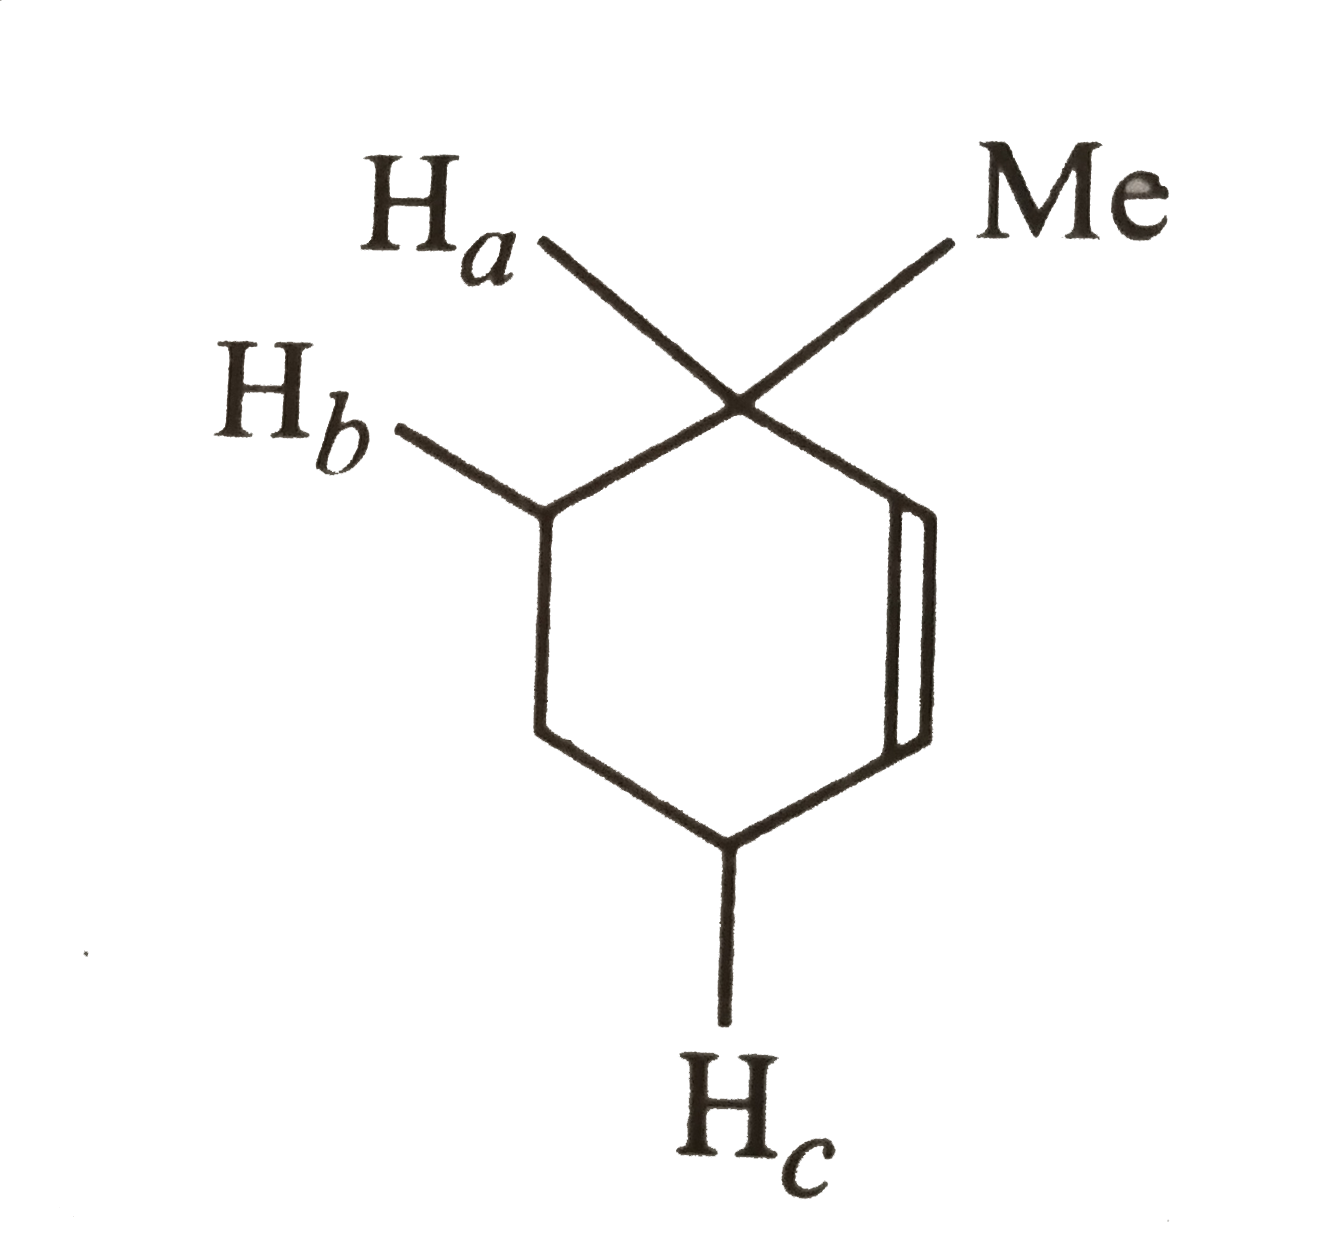 The order of decreasing ease of abstraction of hydrogen atoms in the following molecule is